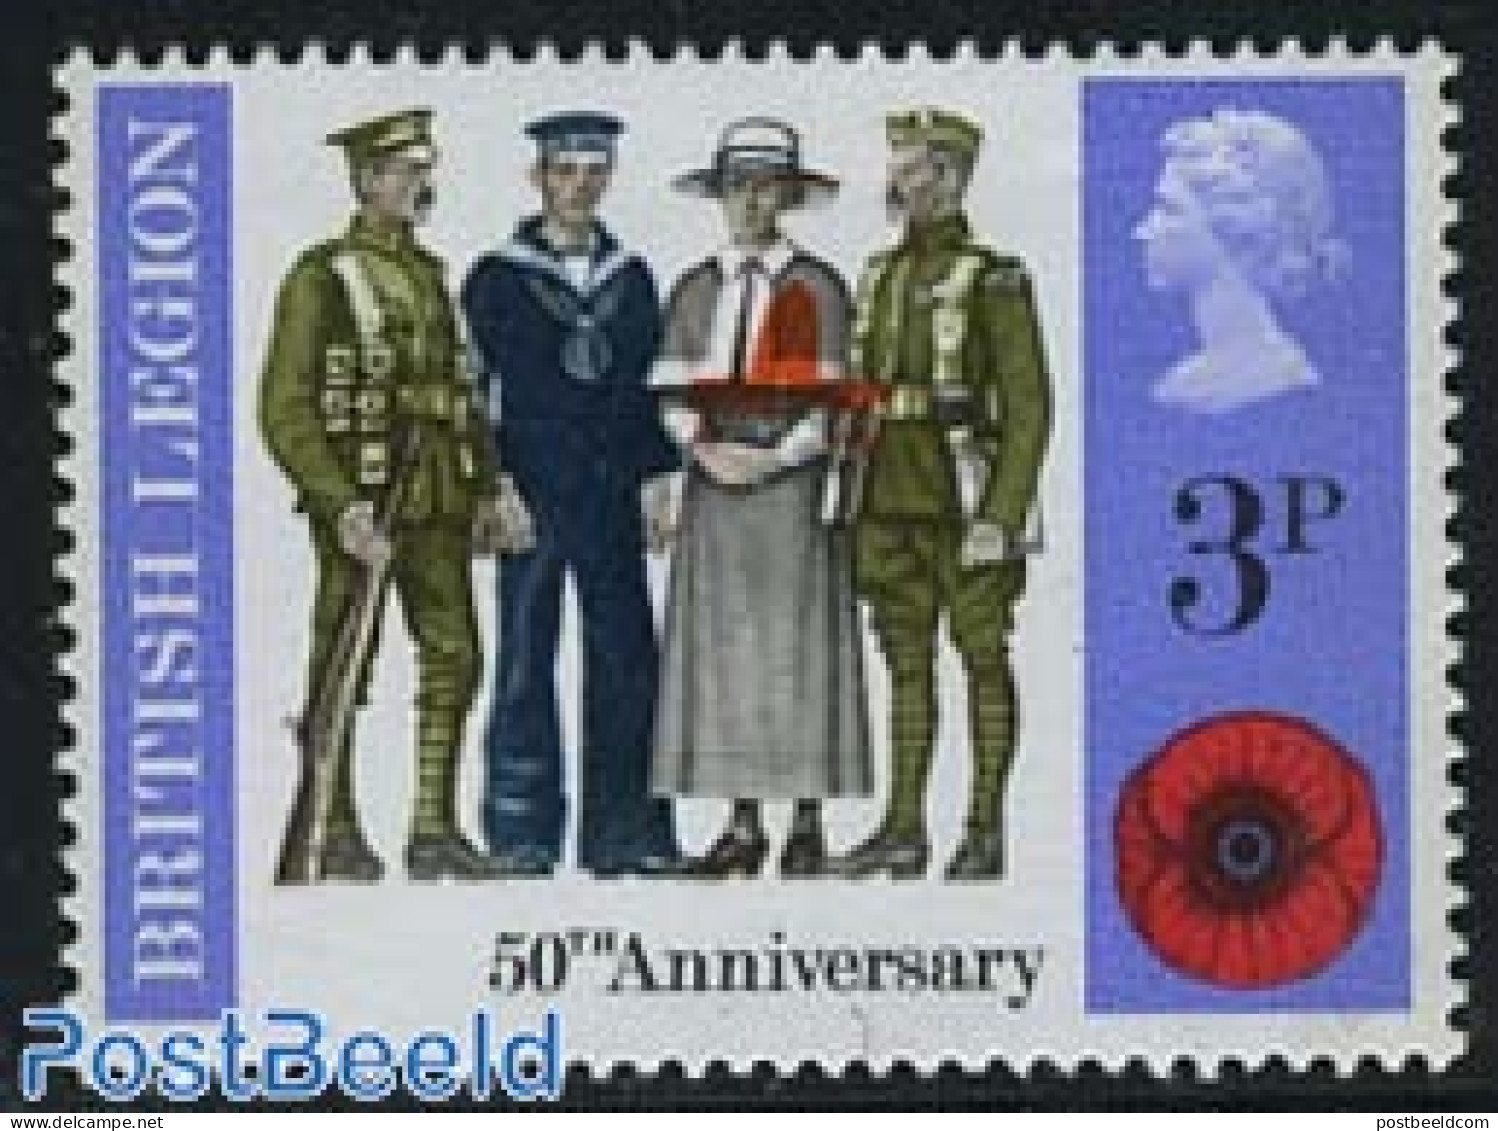 Great Britain 1971 3P With Strongly Moved Redorange Colour, Mint NH, Various - Errors, Misprints, Plate Flaws - Uniforms - Ungebraucht